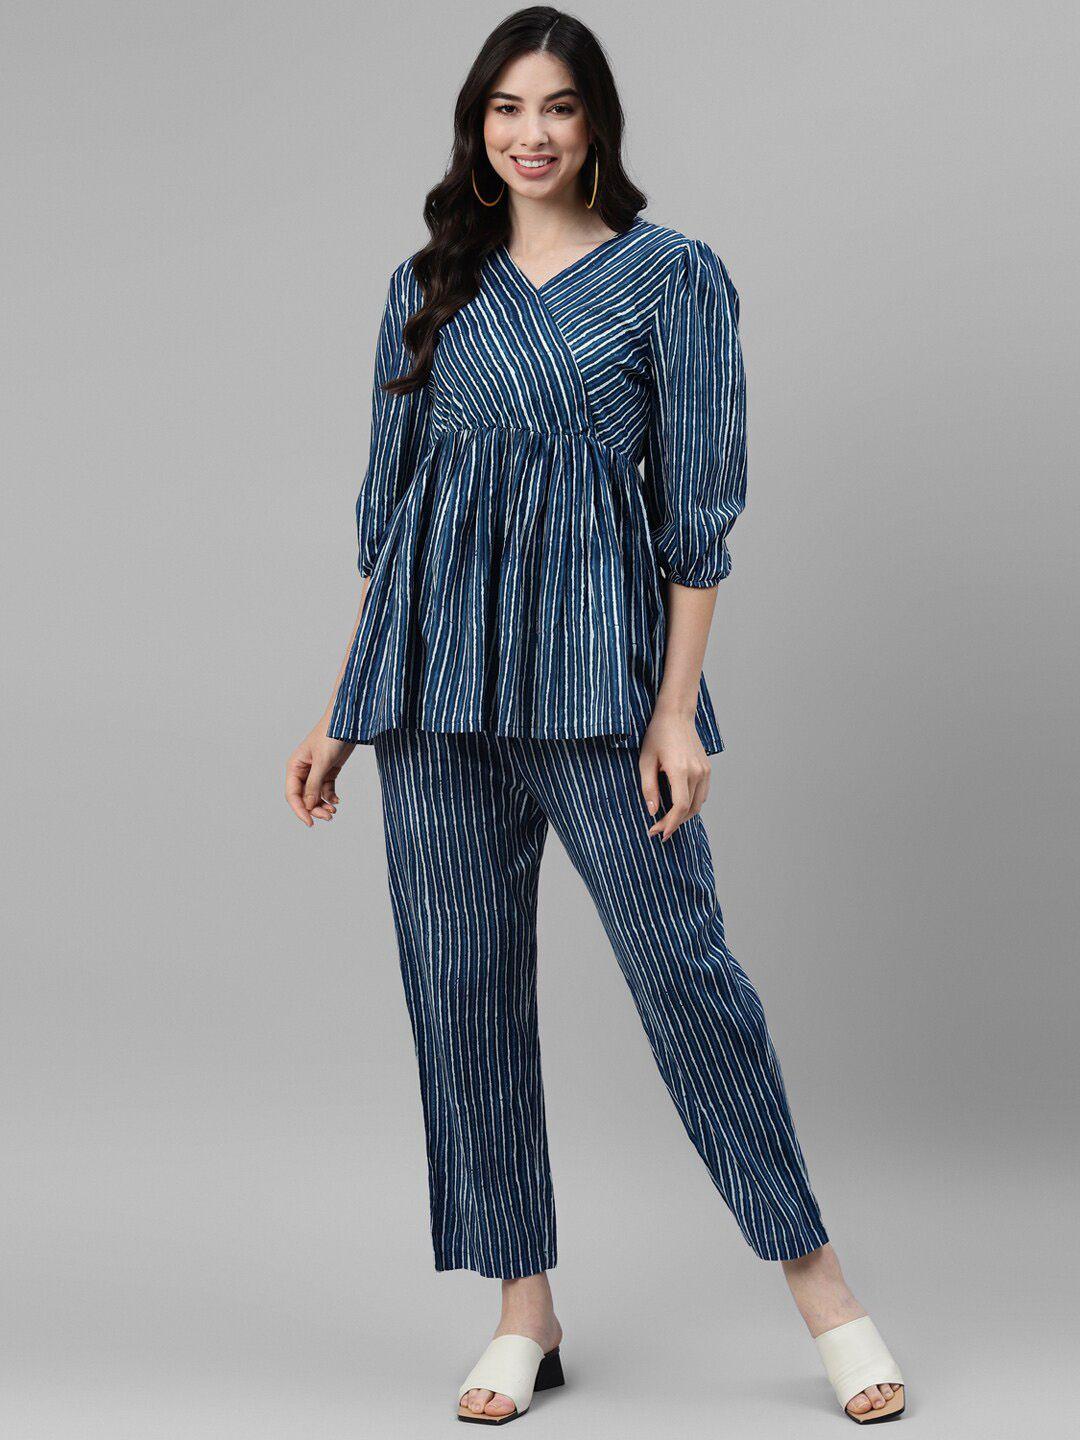 deebaco flared  striped tunic top with trousers co-ords